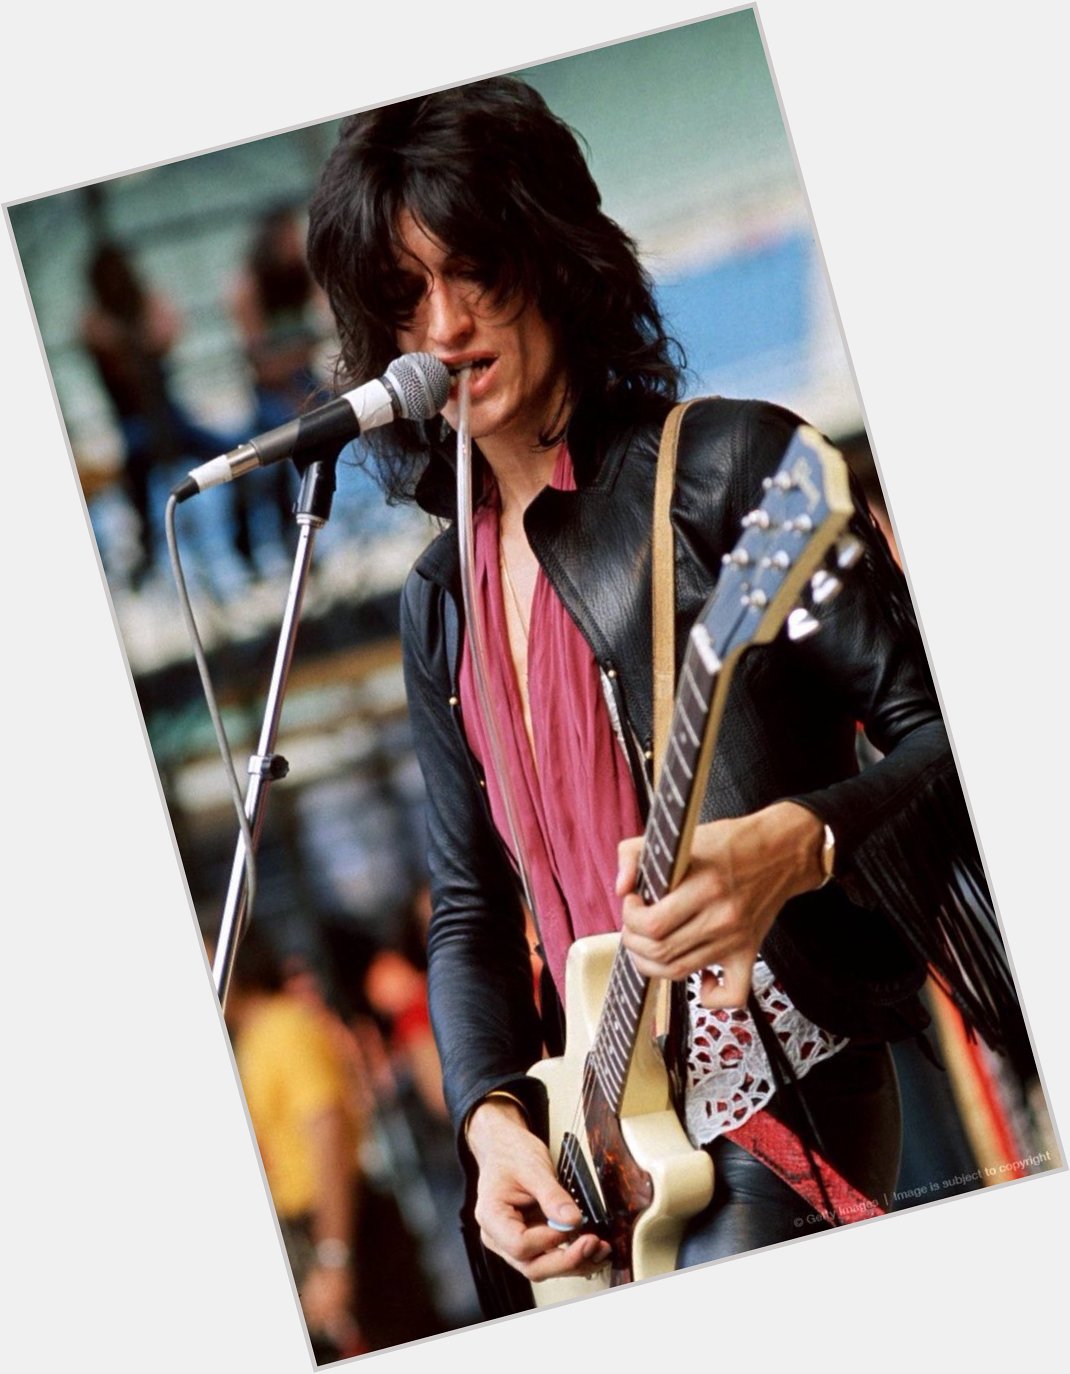 Happy 72nd birthday to the great Joe Perry!  